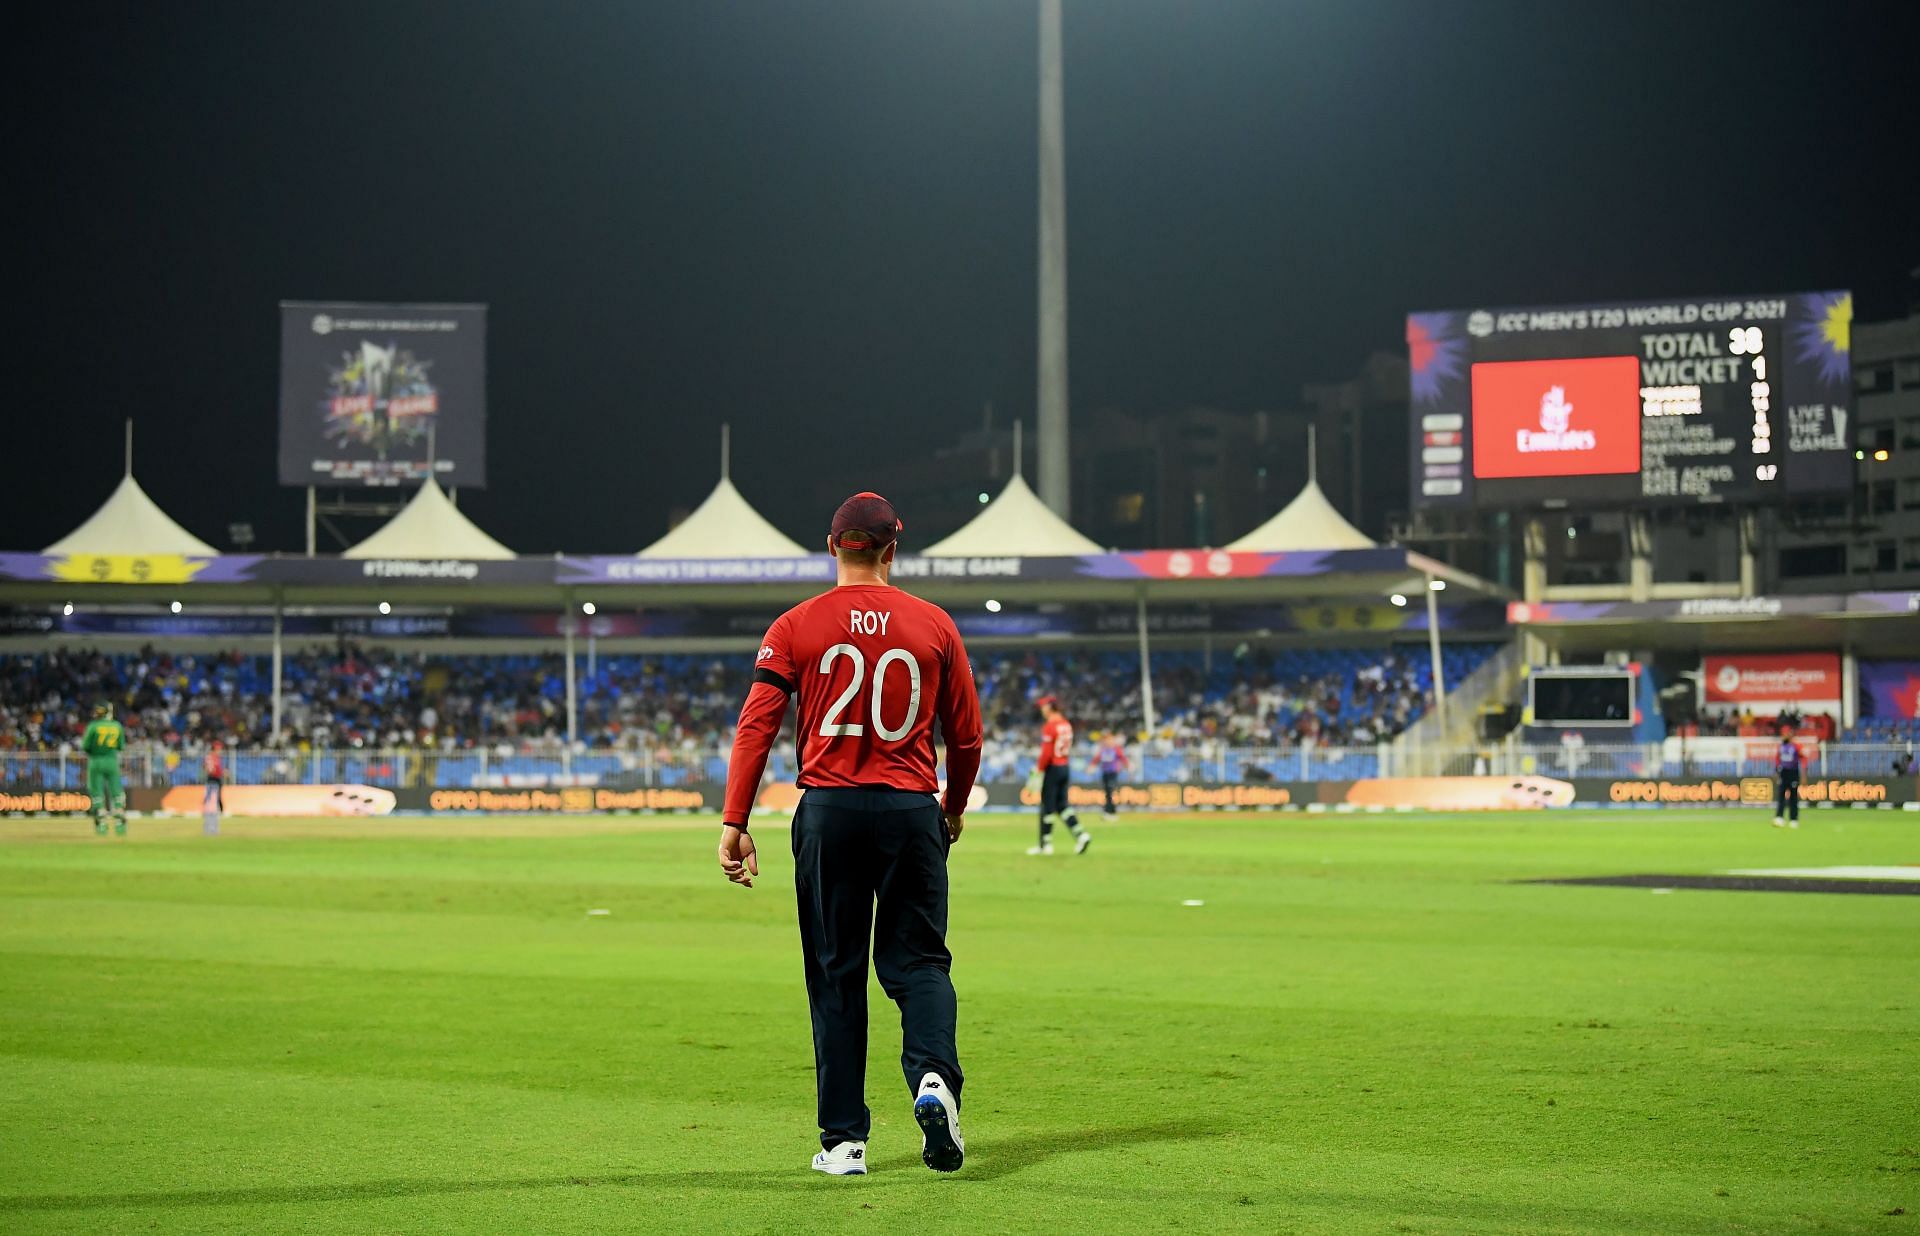 Sharjah Cricket Stadium will host this fixture (Image courtesy: Getty Images)